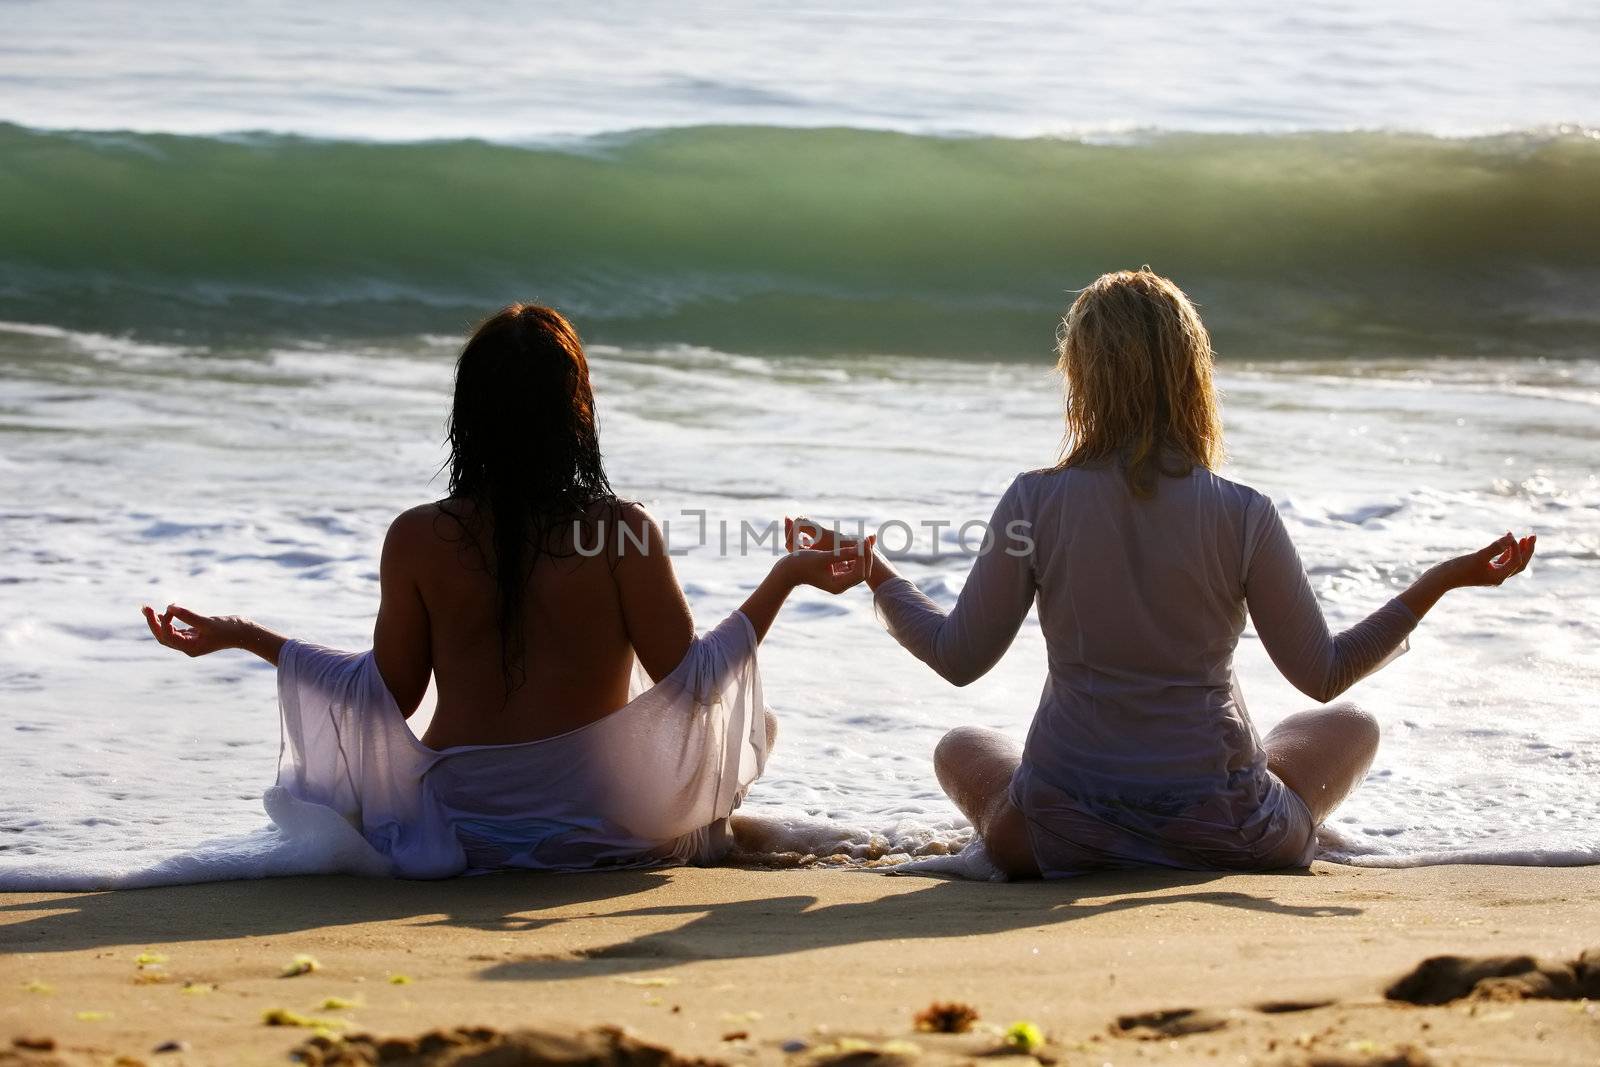 The blonde and brunette meditate on a beach